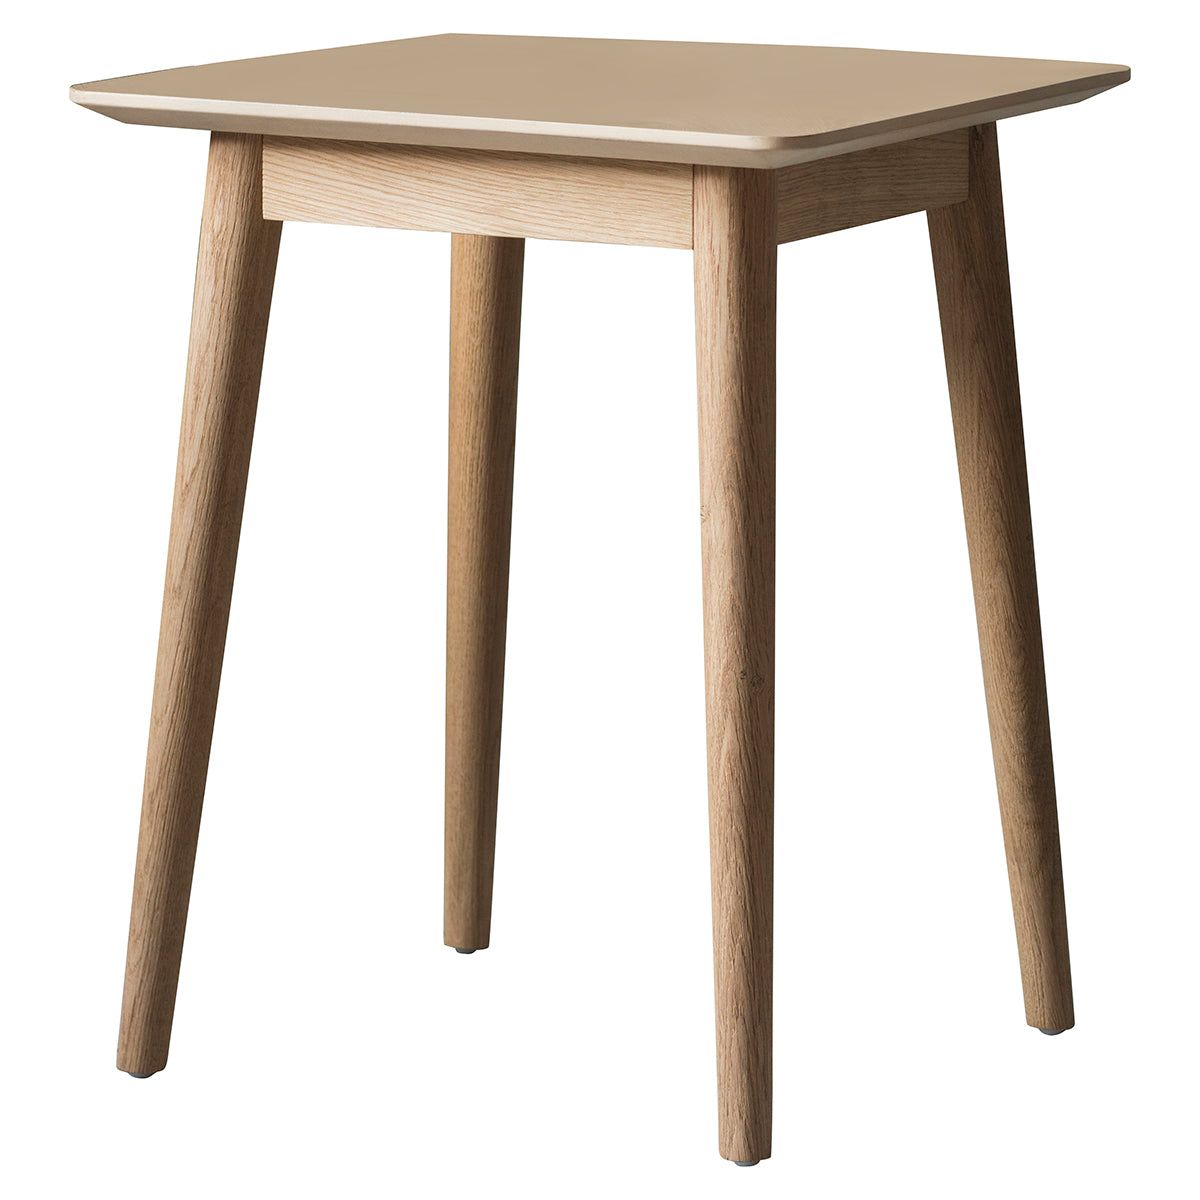 A Tristford Side Table 500x450x600mm from Kikiathome.co.uk, a stylish interior decor piece with wooden legs and a square top.